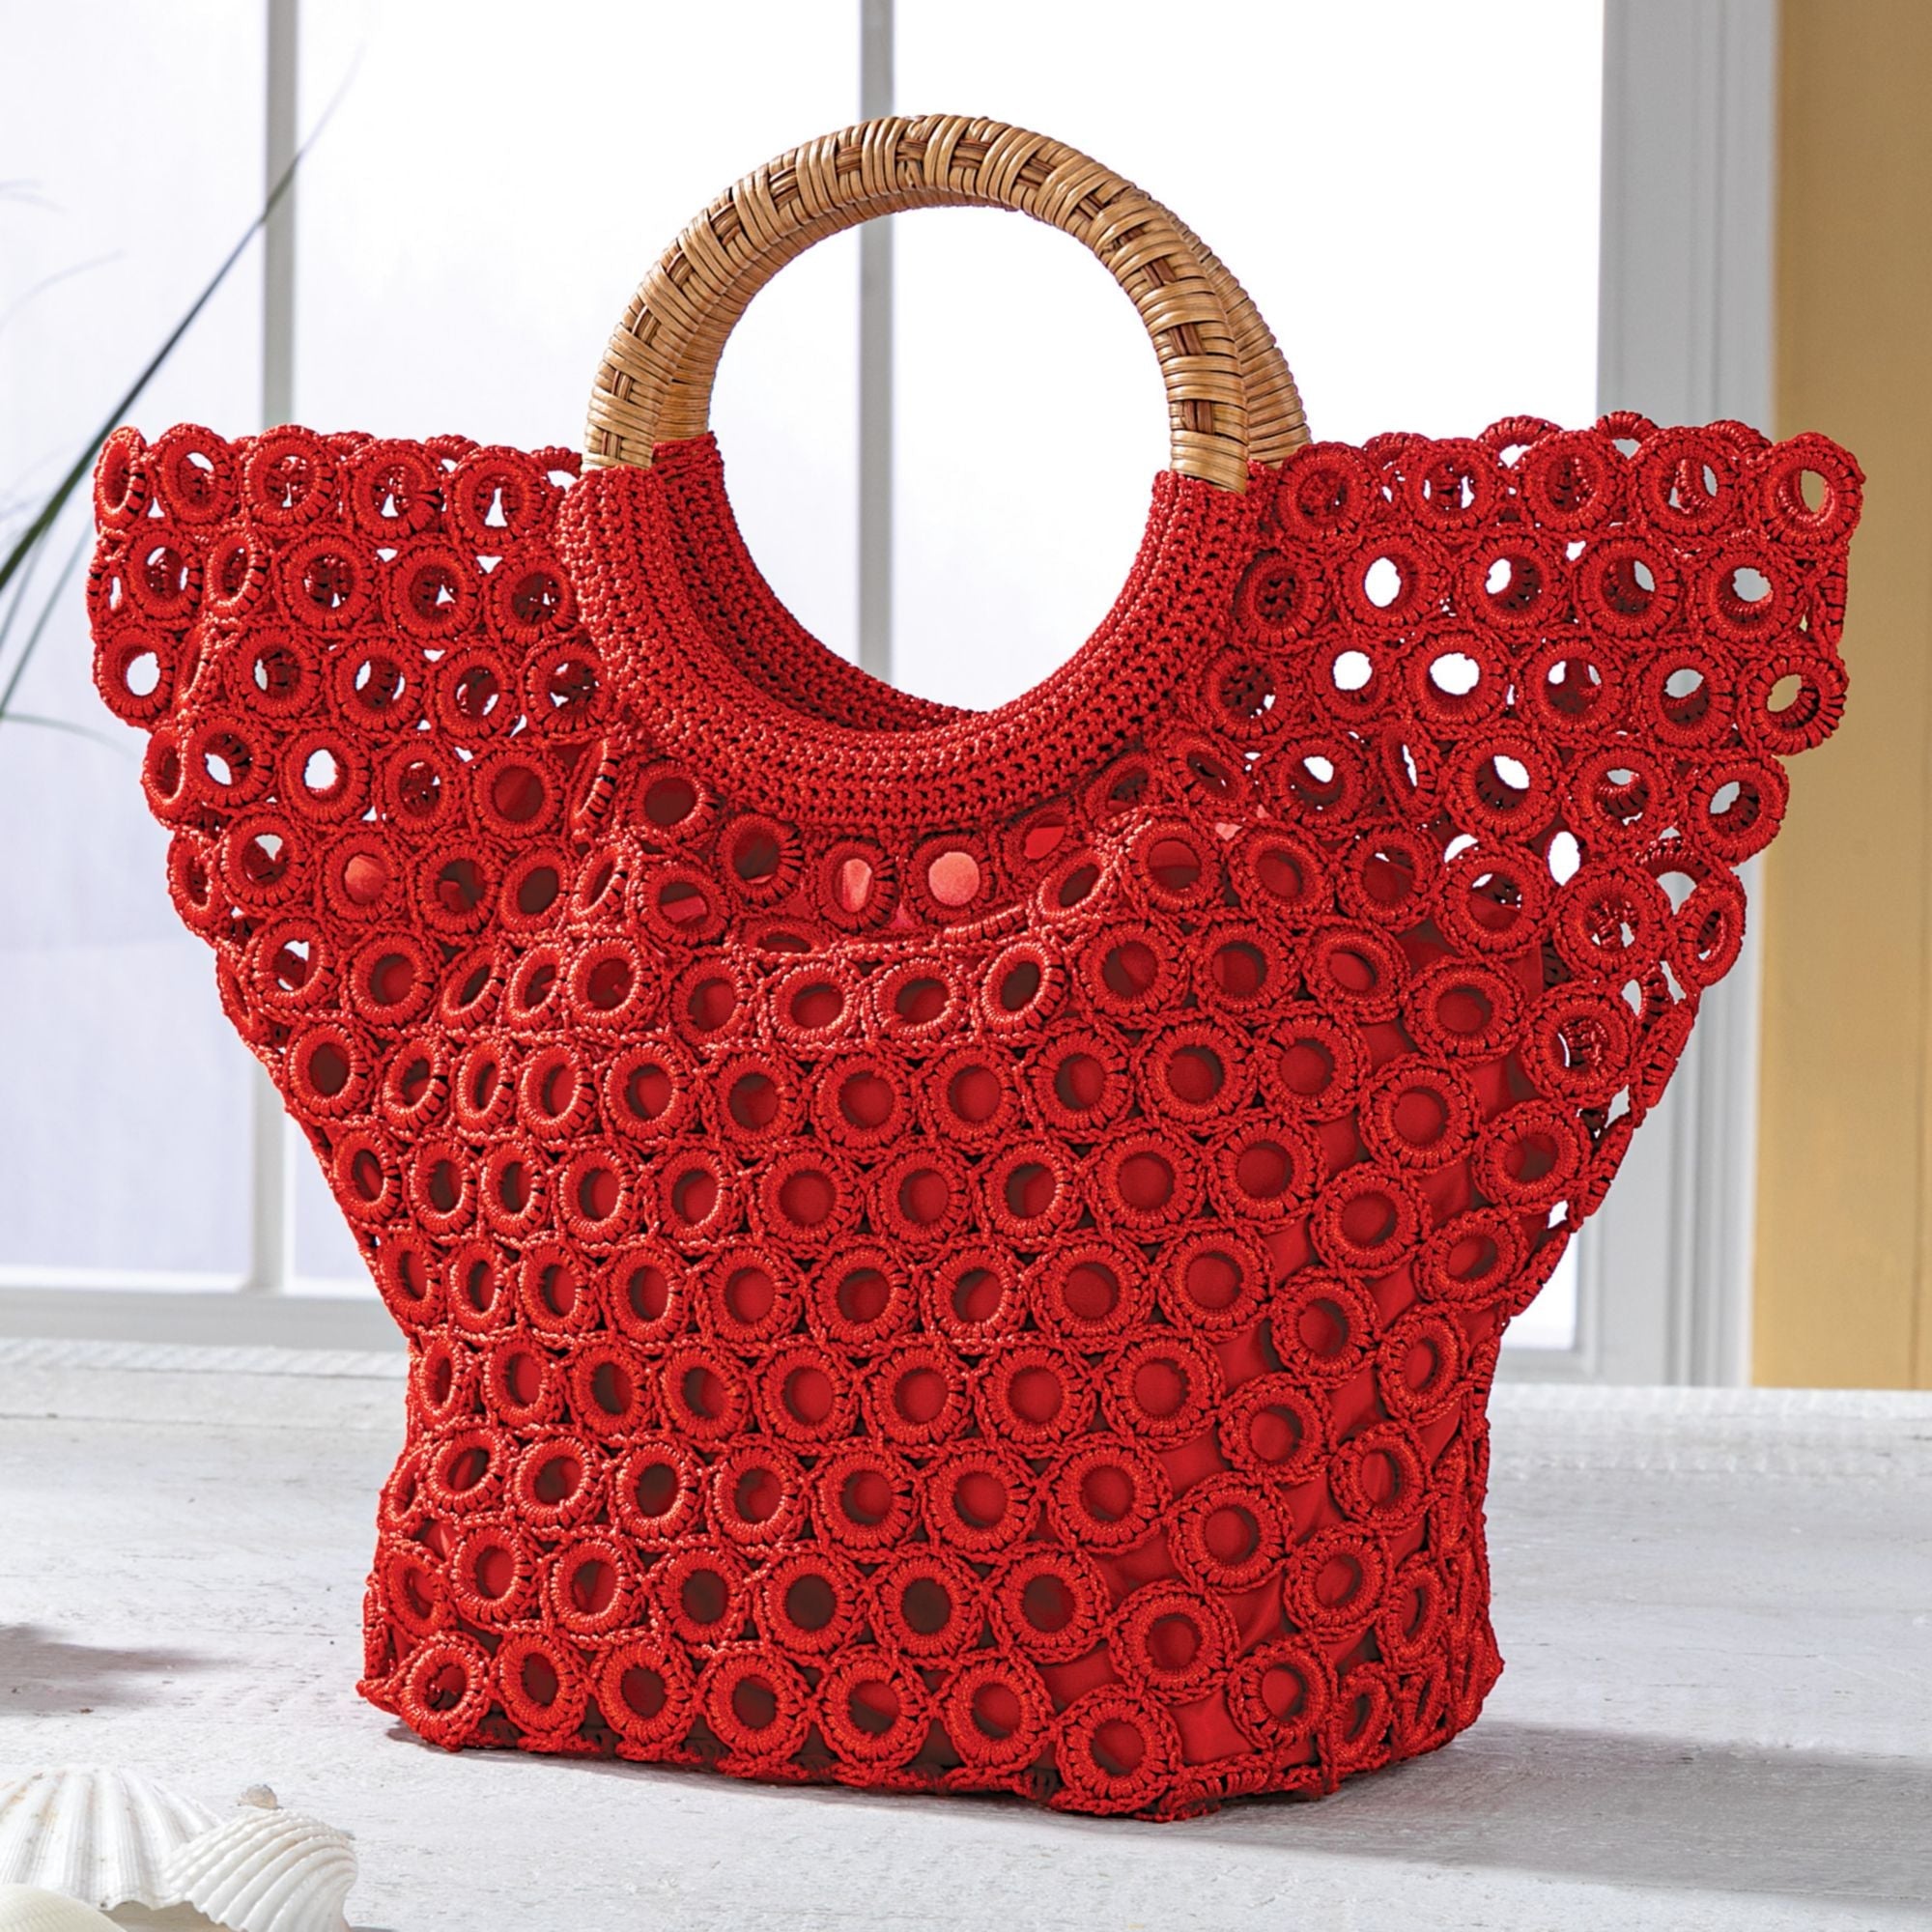 Madame Crocheted Red Tote Bag